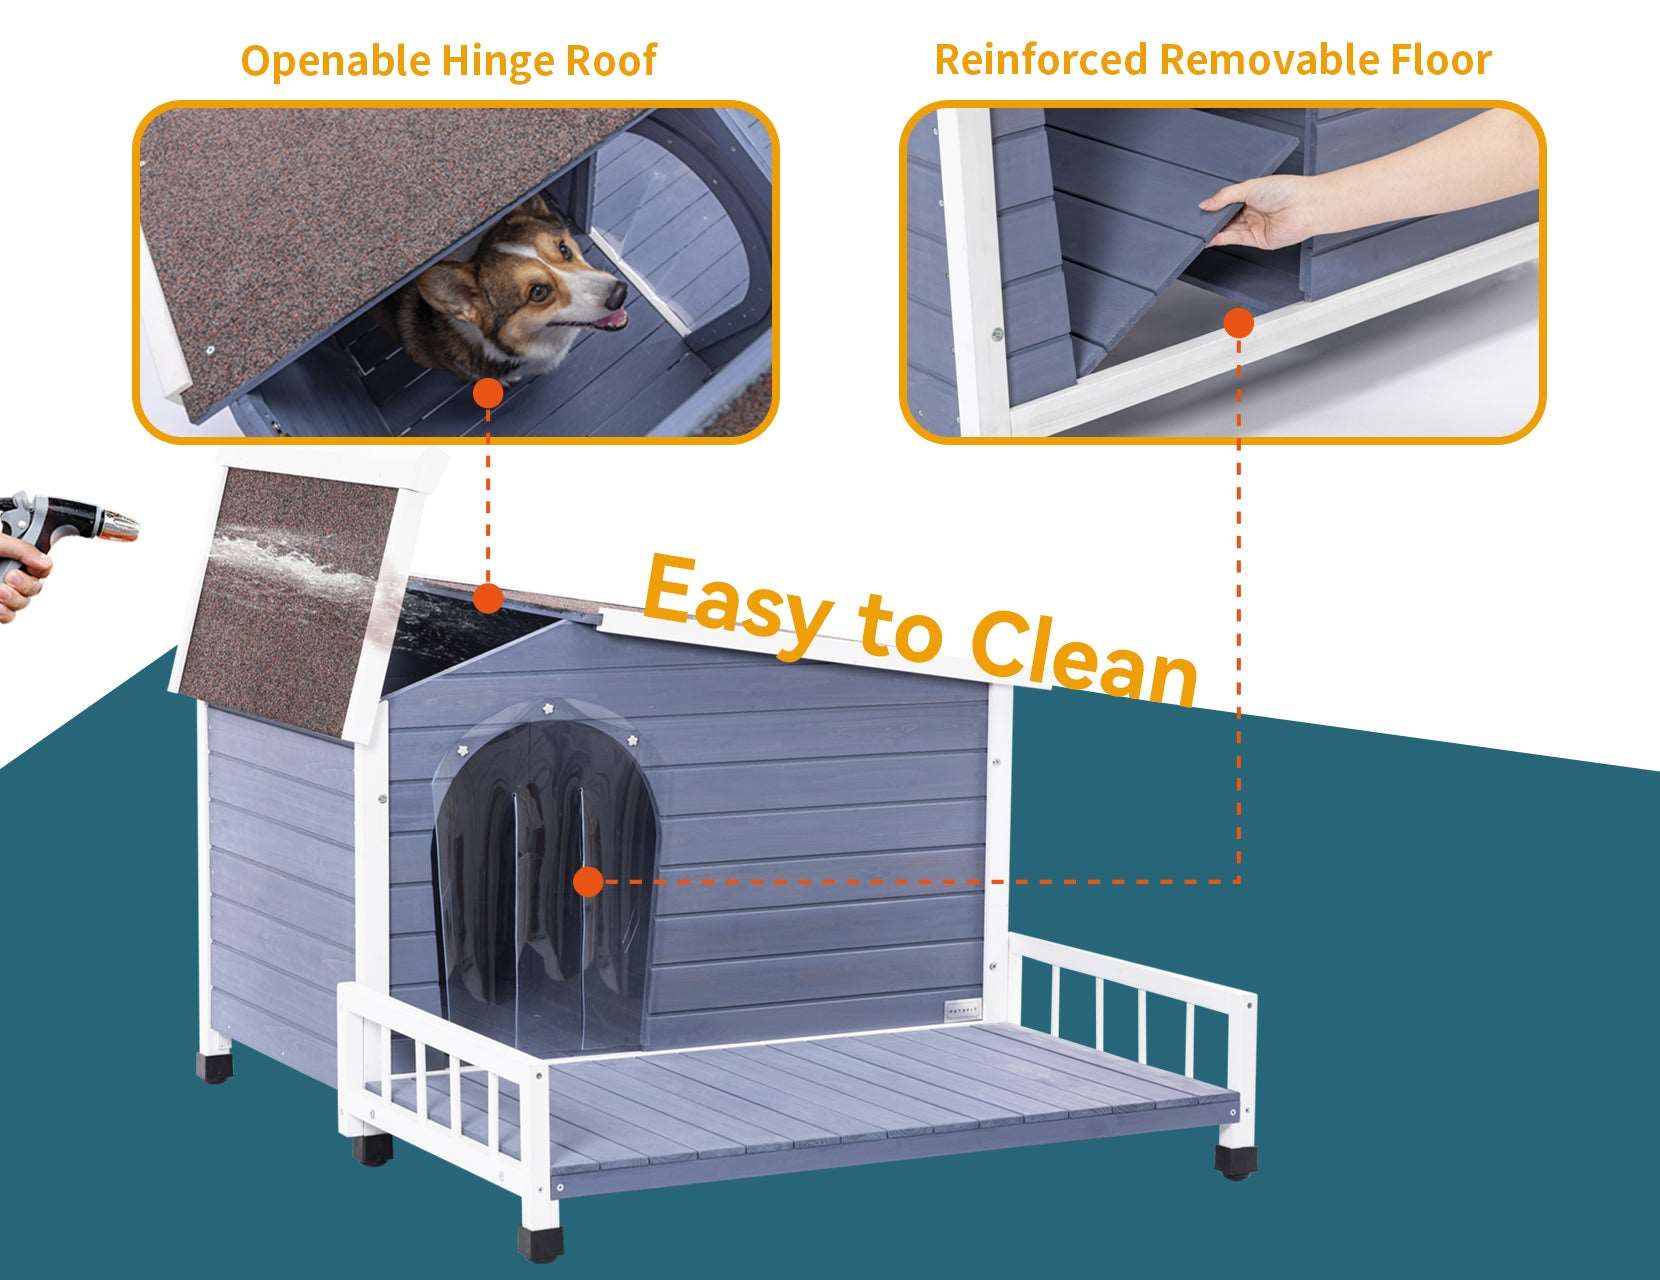 PETSFIT Weatherproof Dog House with Porch & Openable Asphalt Roof